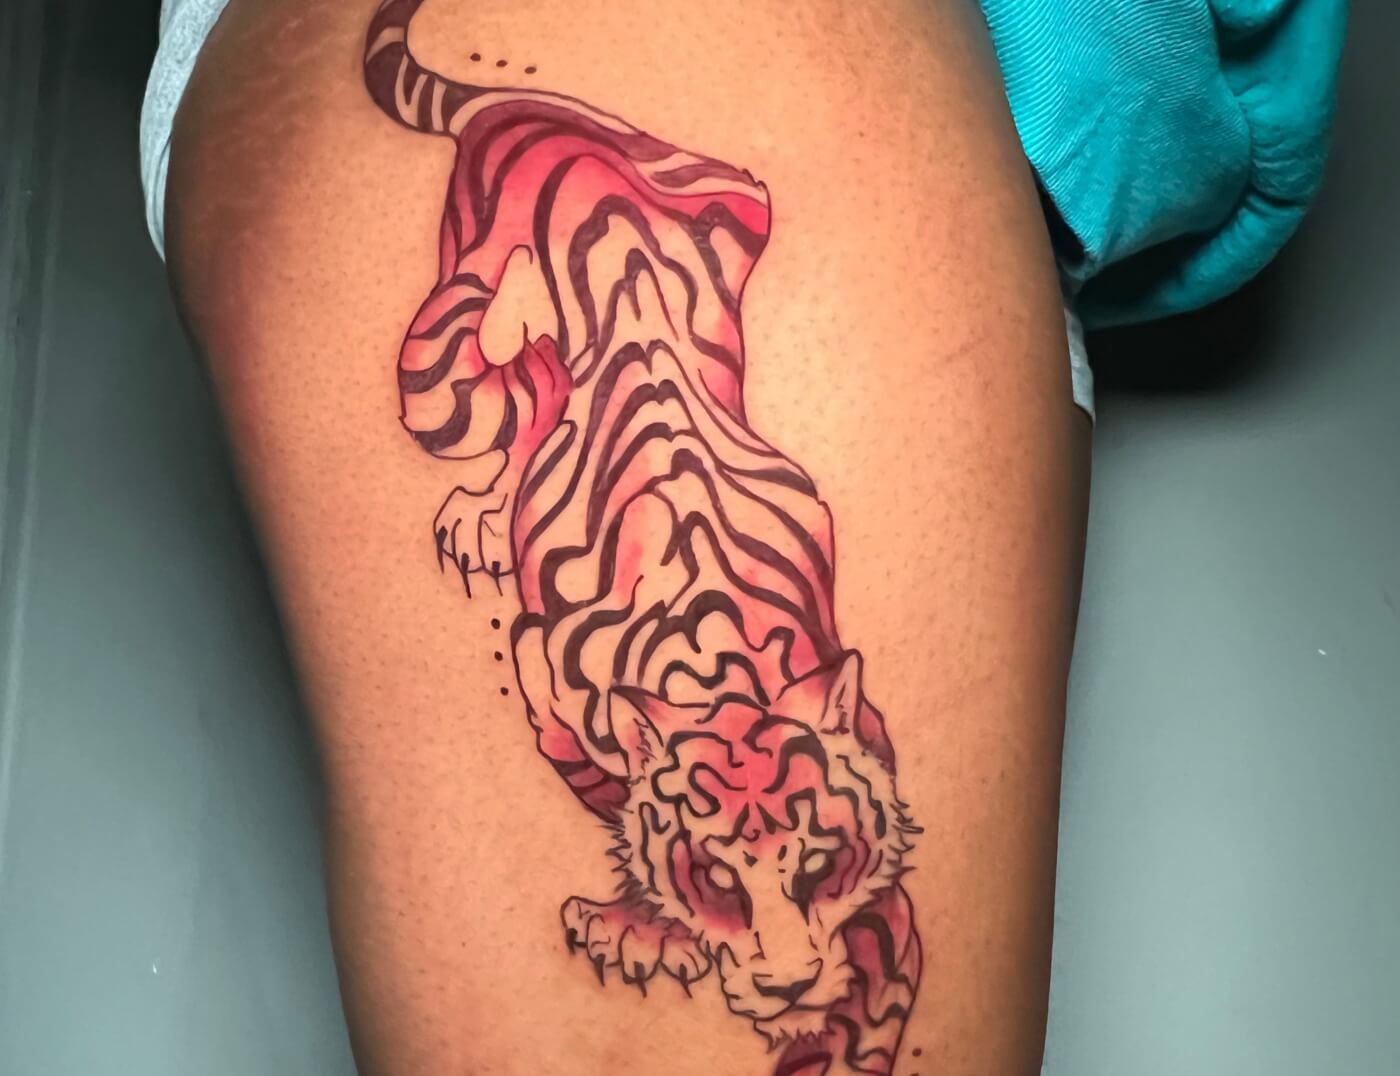 Red Tiger Tattoo By Funk Tha World at Iron Palm Tattoos In Atlanta. Combining the color red with a tiger tattoo signifies the intensity of the tiger's strength and the passion of the person wearing the tattoo.We're open late night until 2AM. Call 404-973-7828 or stop by for a free consultation.